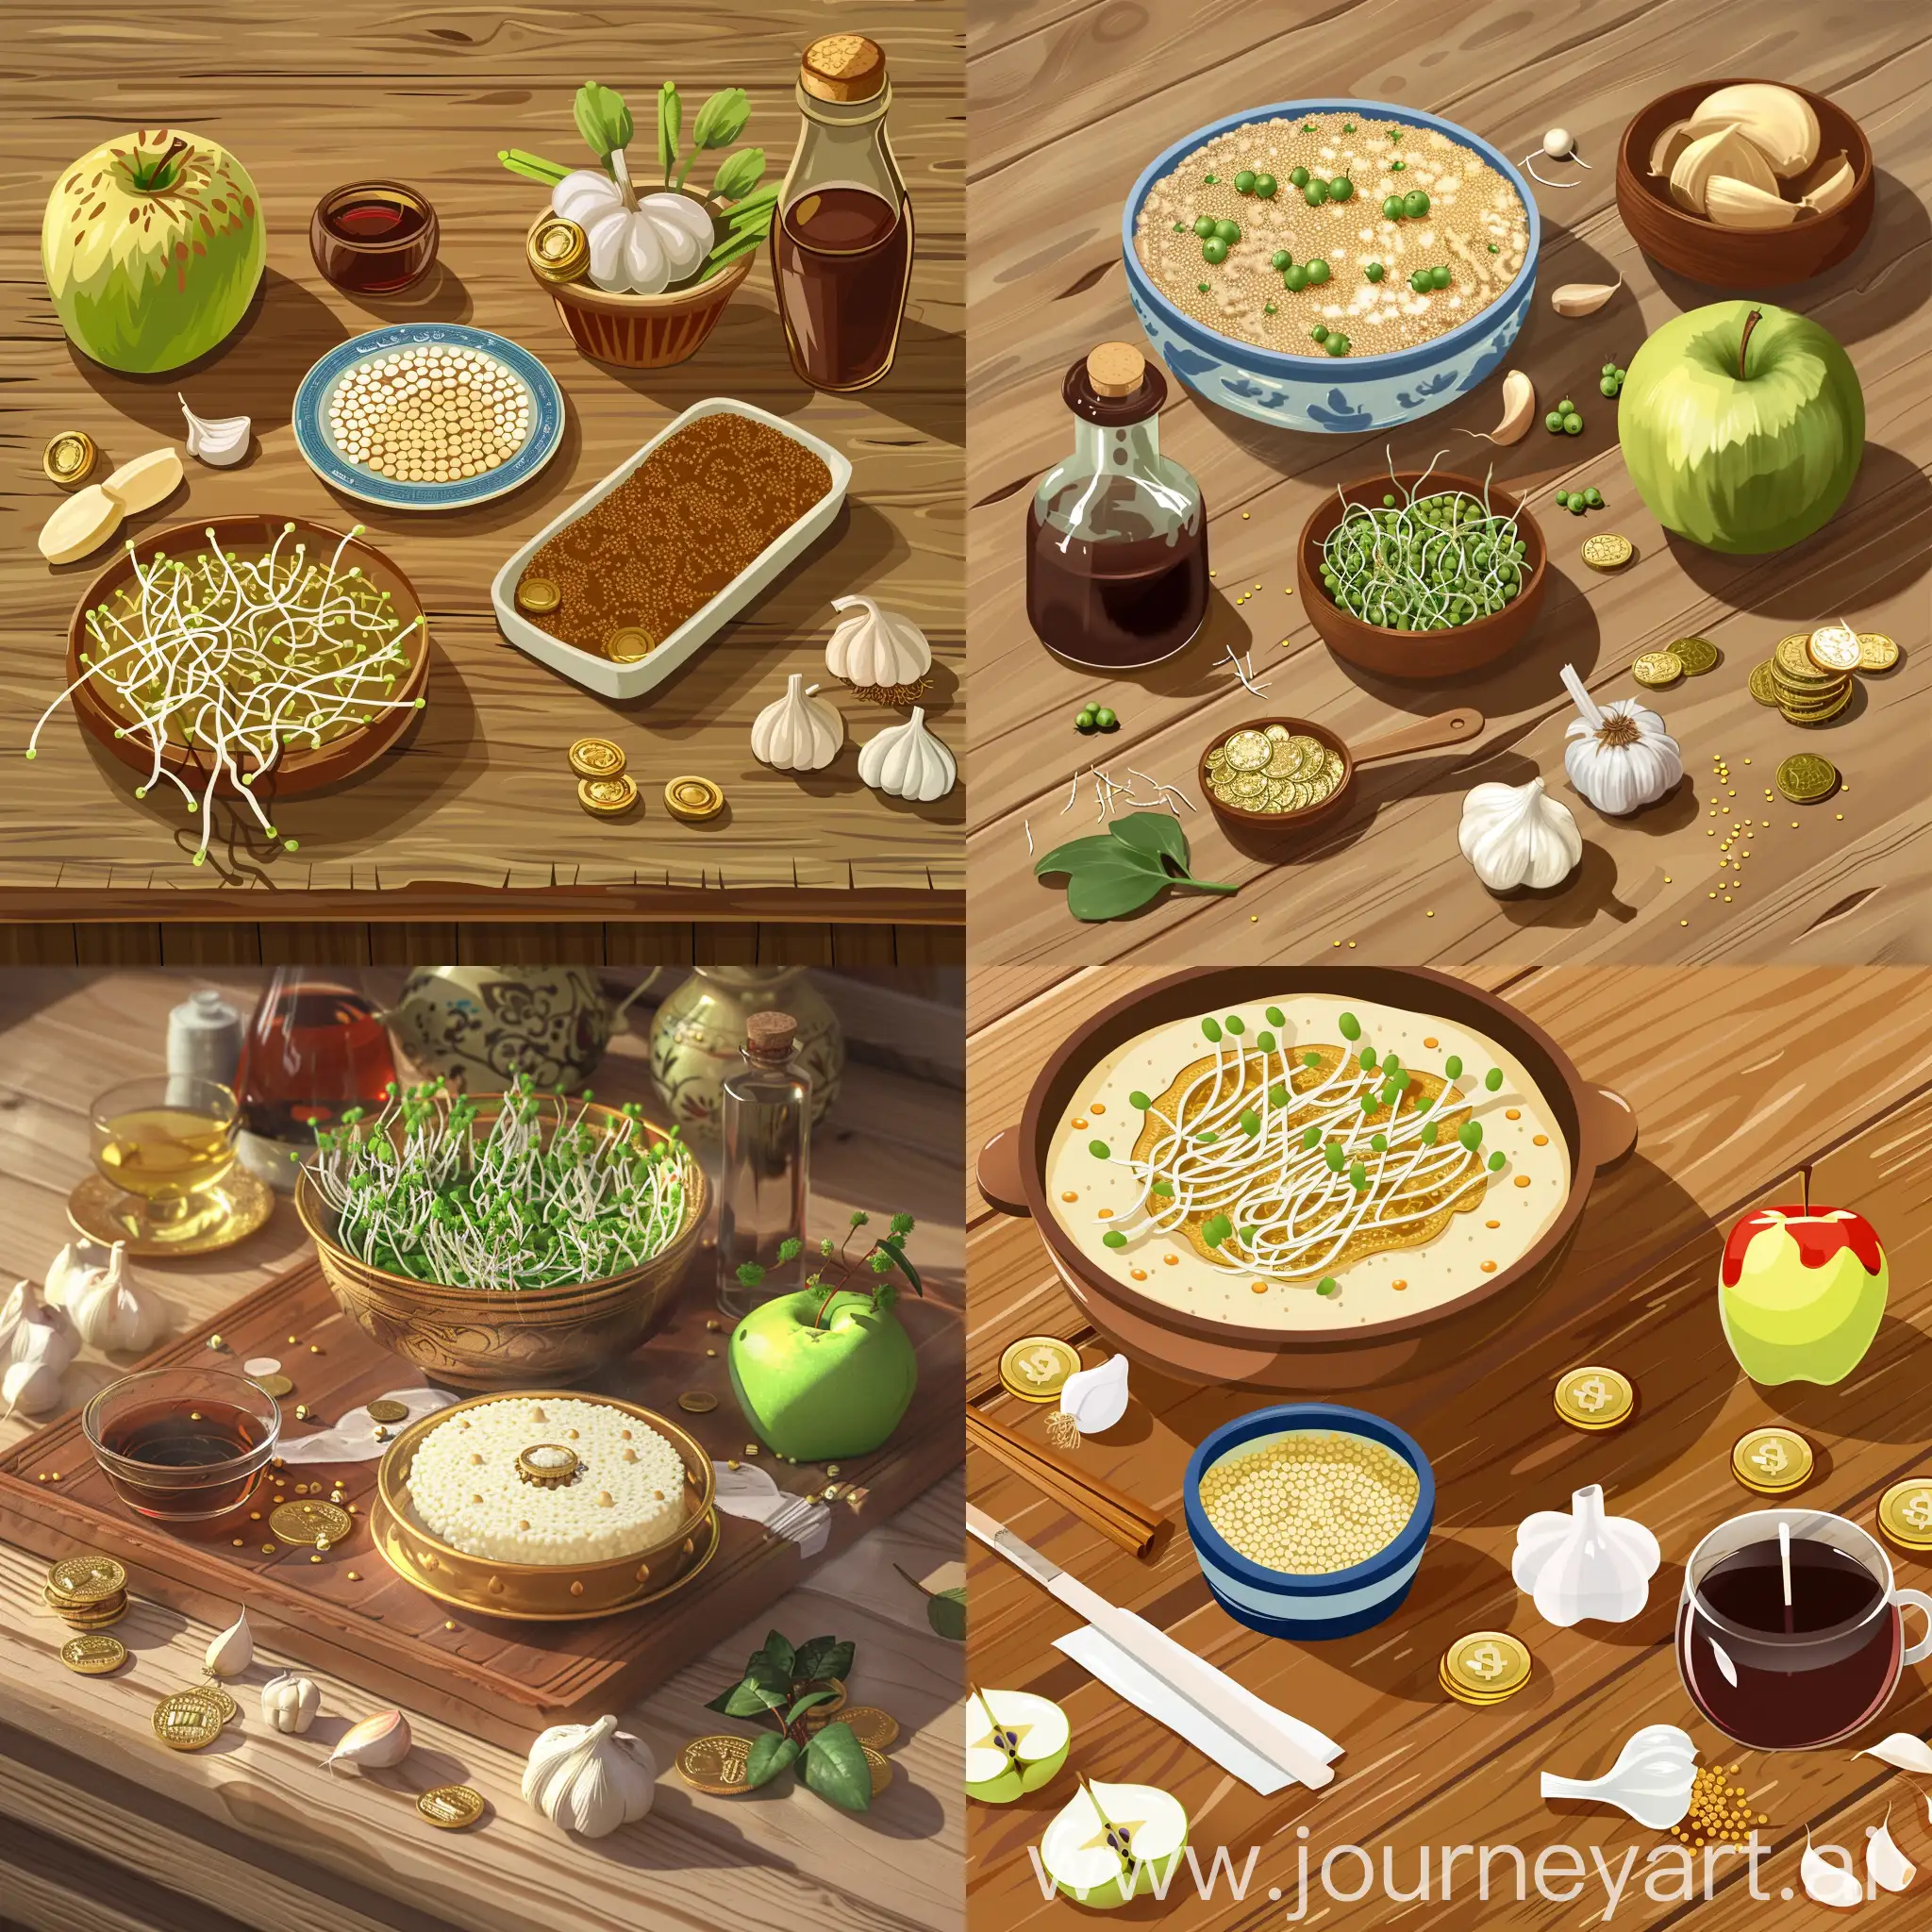 A simple background with a Clash of empiers  themed table set for the Haft-Seen traditional Persian New Year's display in the spring season, featuring mung bean or lentil sprouts , apple, sweet pudding made from wheat germ , vinegar, garlic, coins in dish , placed on a wooden table ,in isometric view, high detailed , 4k